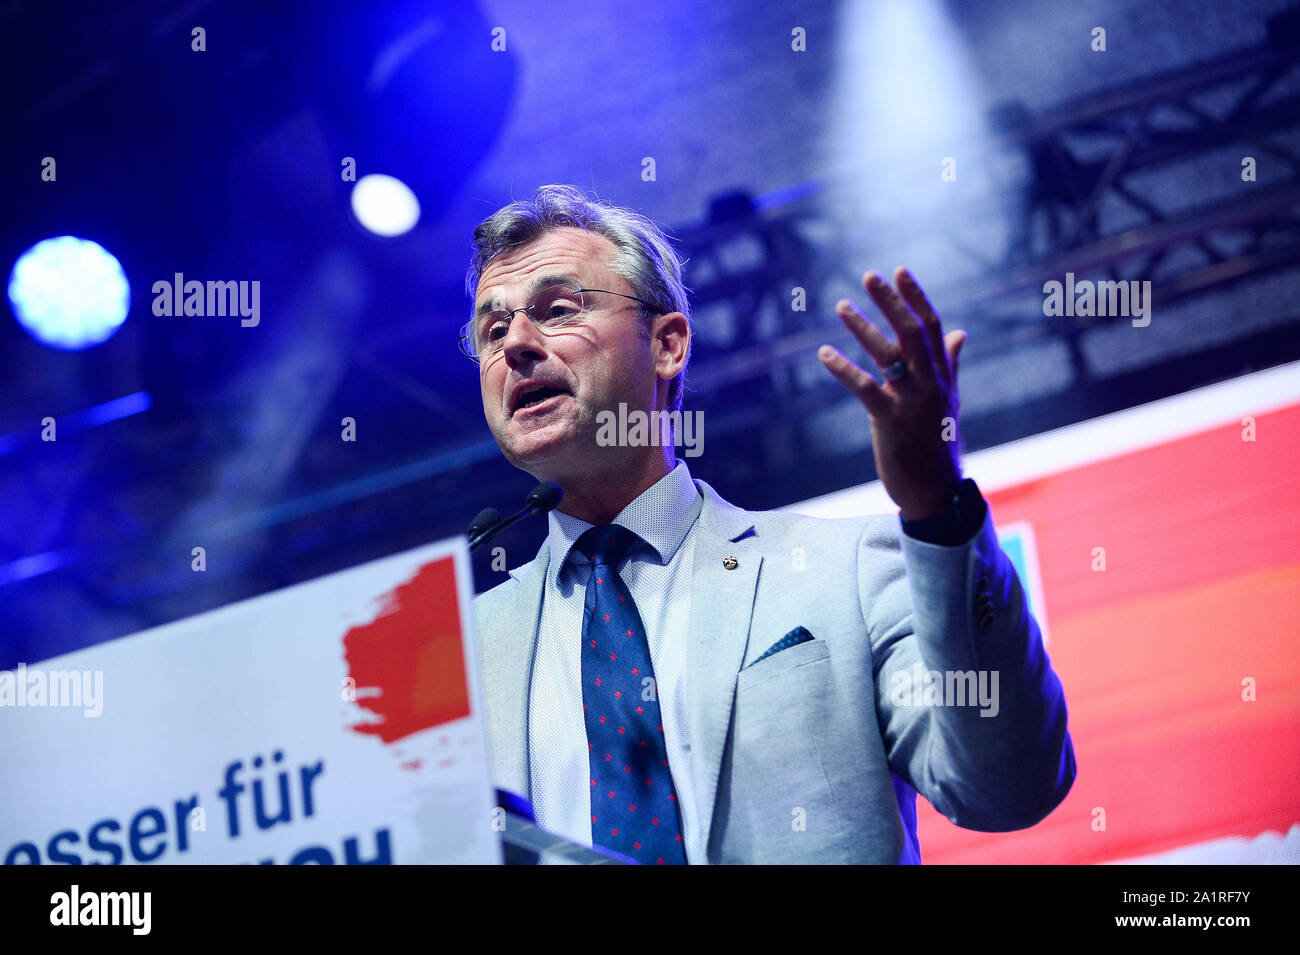 Vienna, Austria. 27th Sep, 2019. The Leader of the right-wing Austrian Freedom Party (FPOe), Norbert Hofer speaks during a campaign event ahead of Sunday's snap parliamentary elections.On September 29, 2019 parliamentary elections will take place as a result of a hidden-camera footage where OeVP's coalition partner, the far-right Freedom Party (FPOe) was caught up in a corruption scandal and brought the government down. Credit: Omar Marques/SOPA Images/ZUMA Wire/Alamy Live News Stock Photo